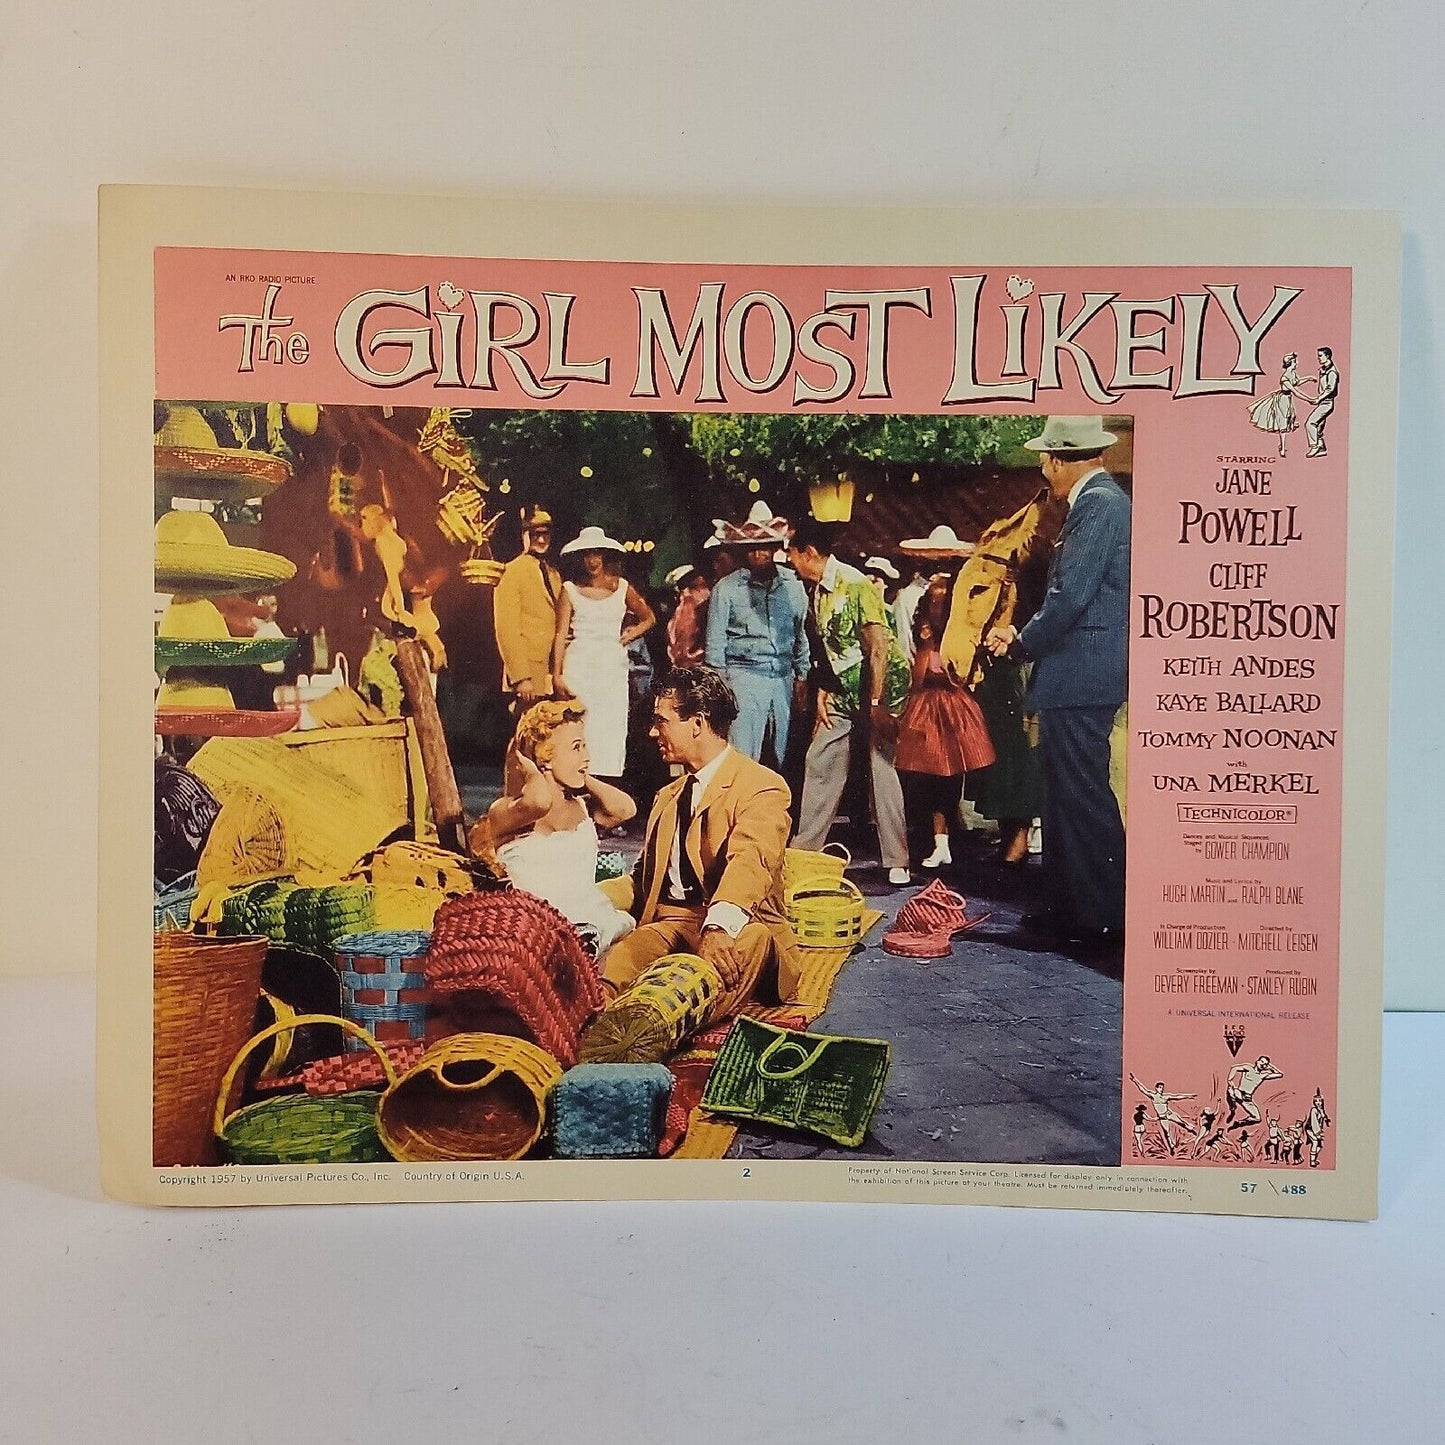 The Girl Most Likely ORIGINAL 1957 Lobby Card 2 Vintage RomCom Pink Movie Poster